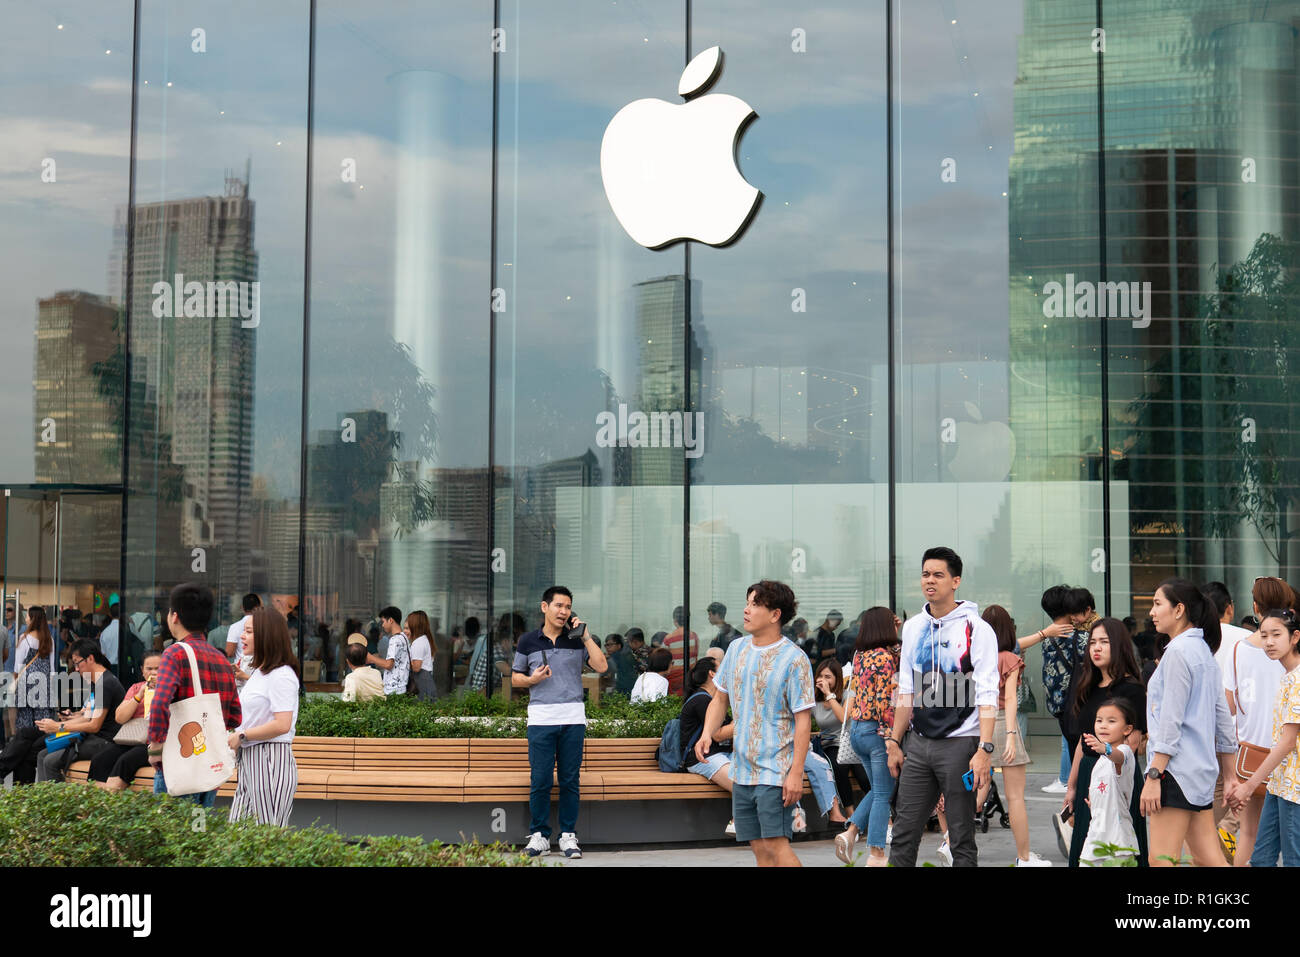 Bangkok, Thailand - November 10, 2018: People visiting the first Apple store in Thailand at Iconsiam shopping mall. Stock Photo